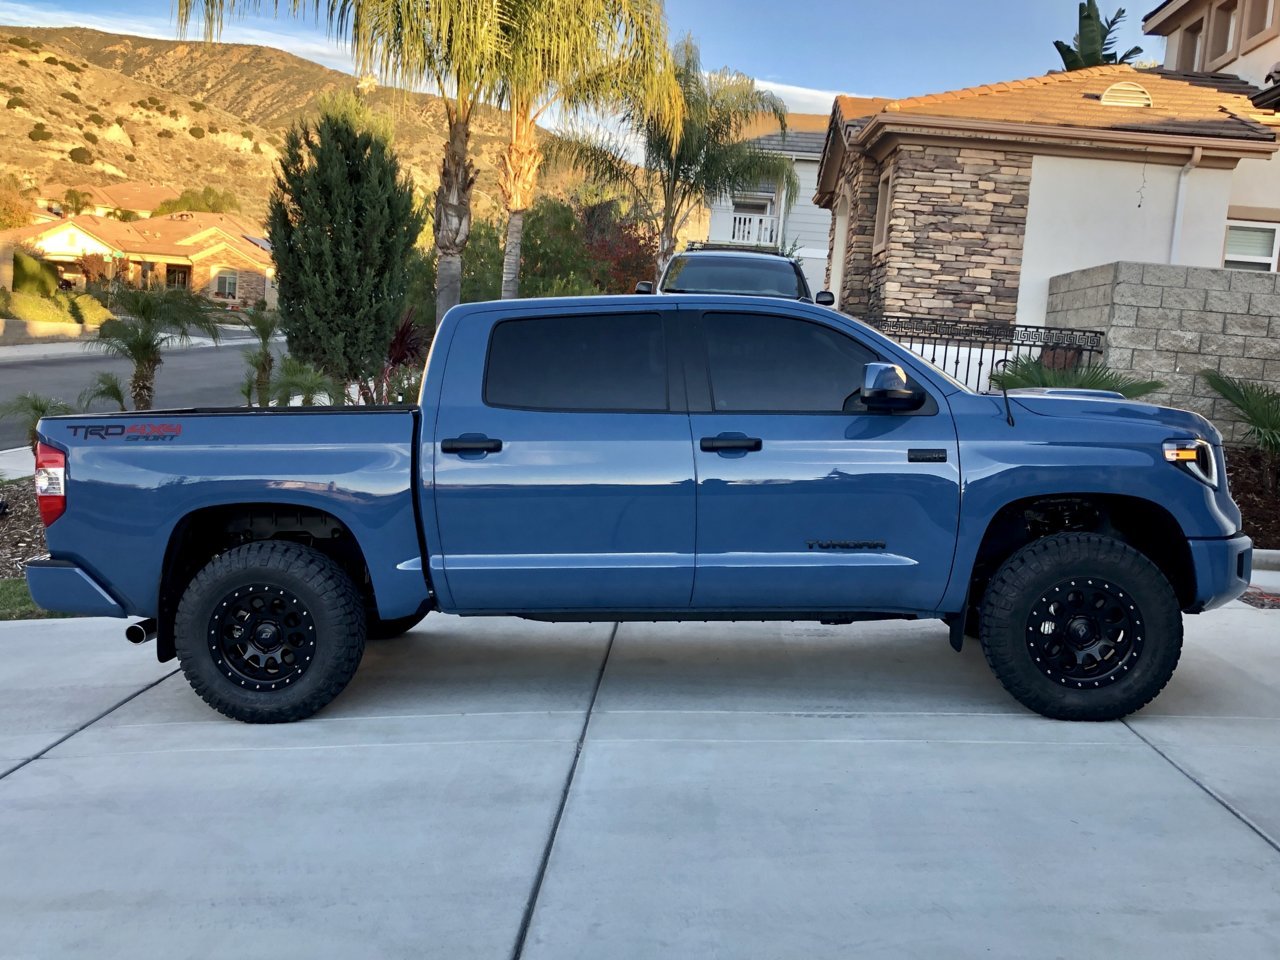 Let's see your VOODOO BLUE Tundra! | Page 6 | Toyota Tundra Forum